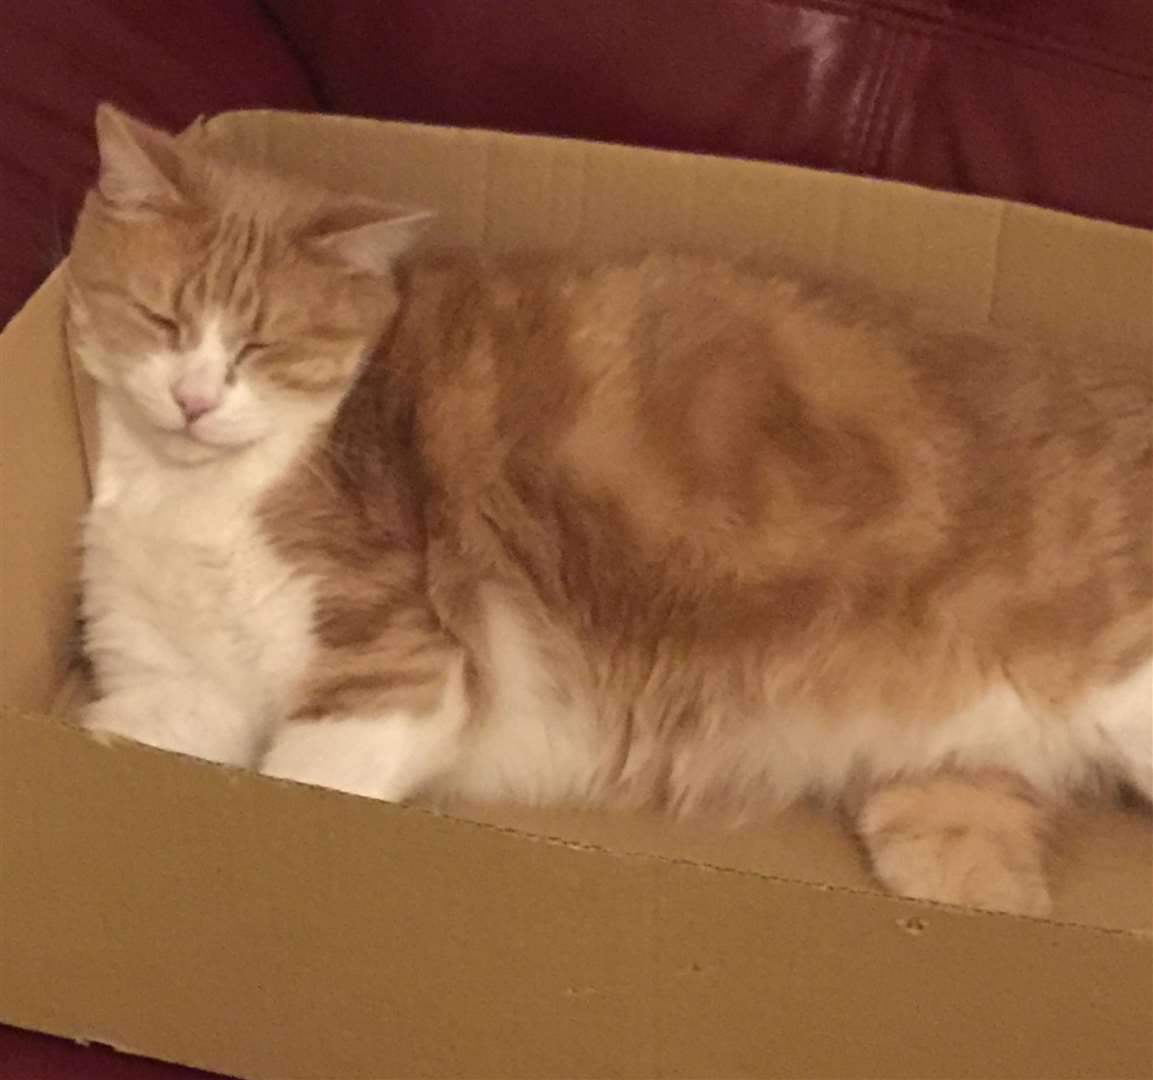 Clearoff is one of the cats reported missing in Seasalter. Picture: Jayne Dawkins